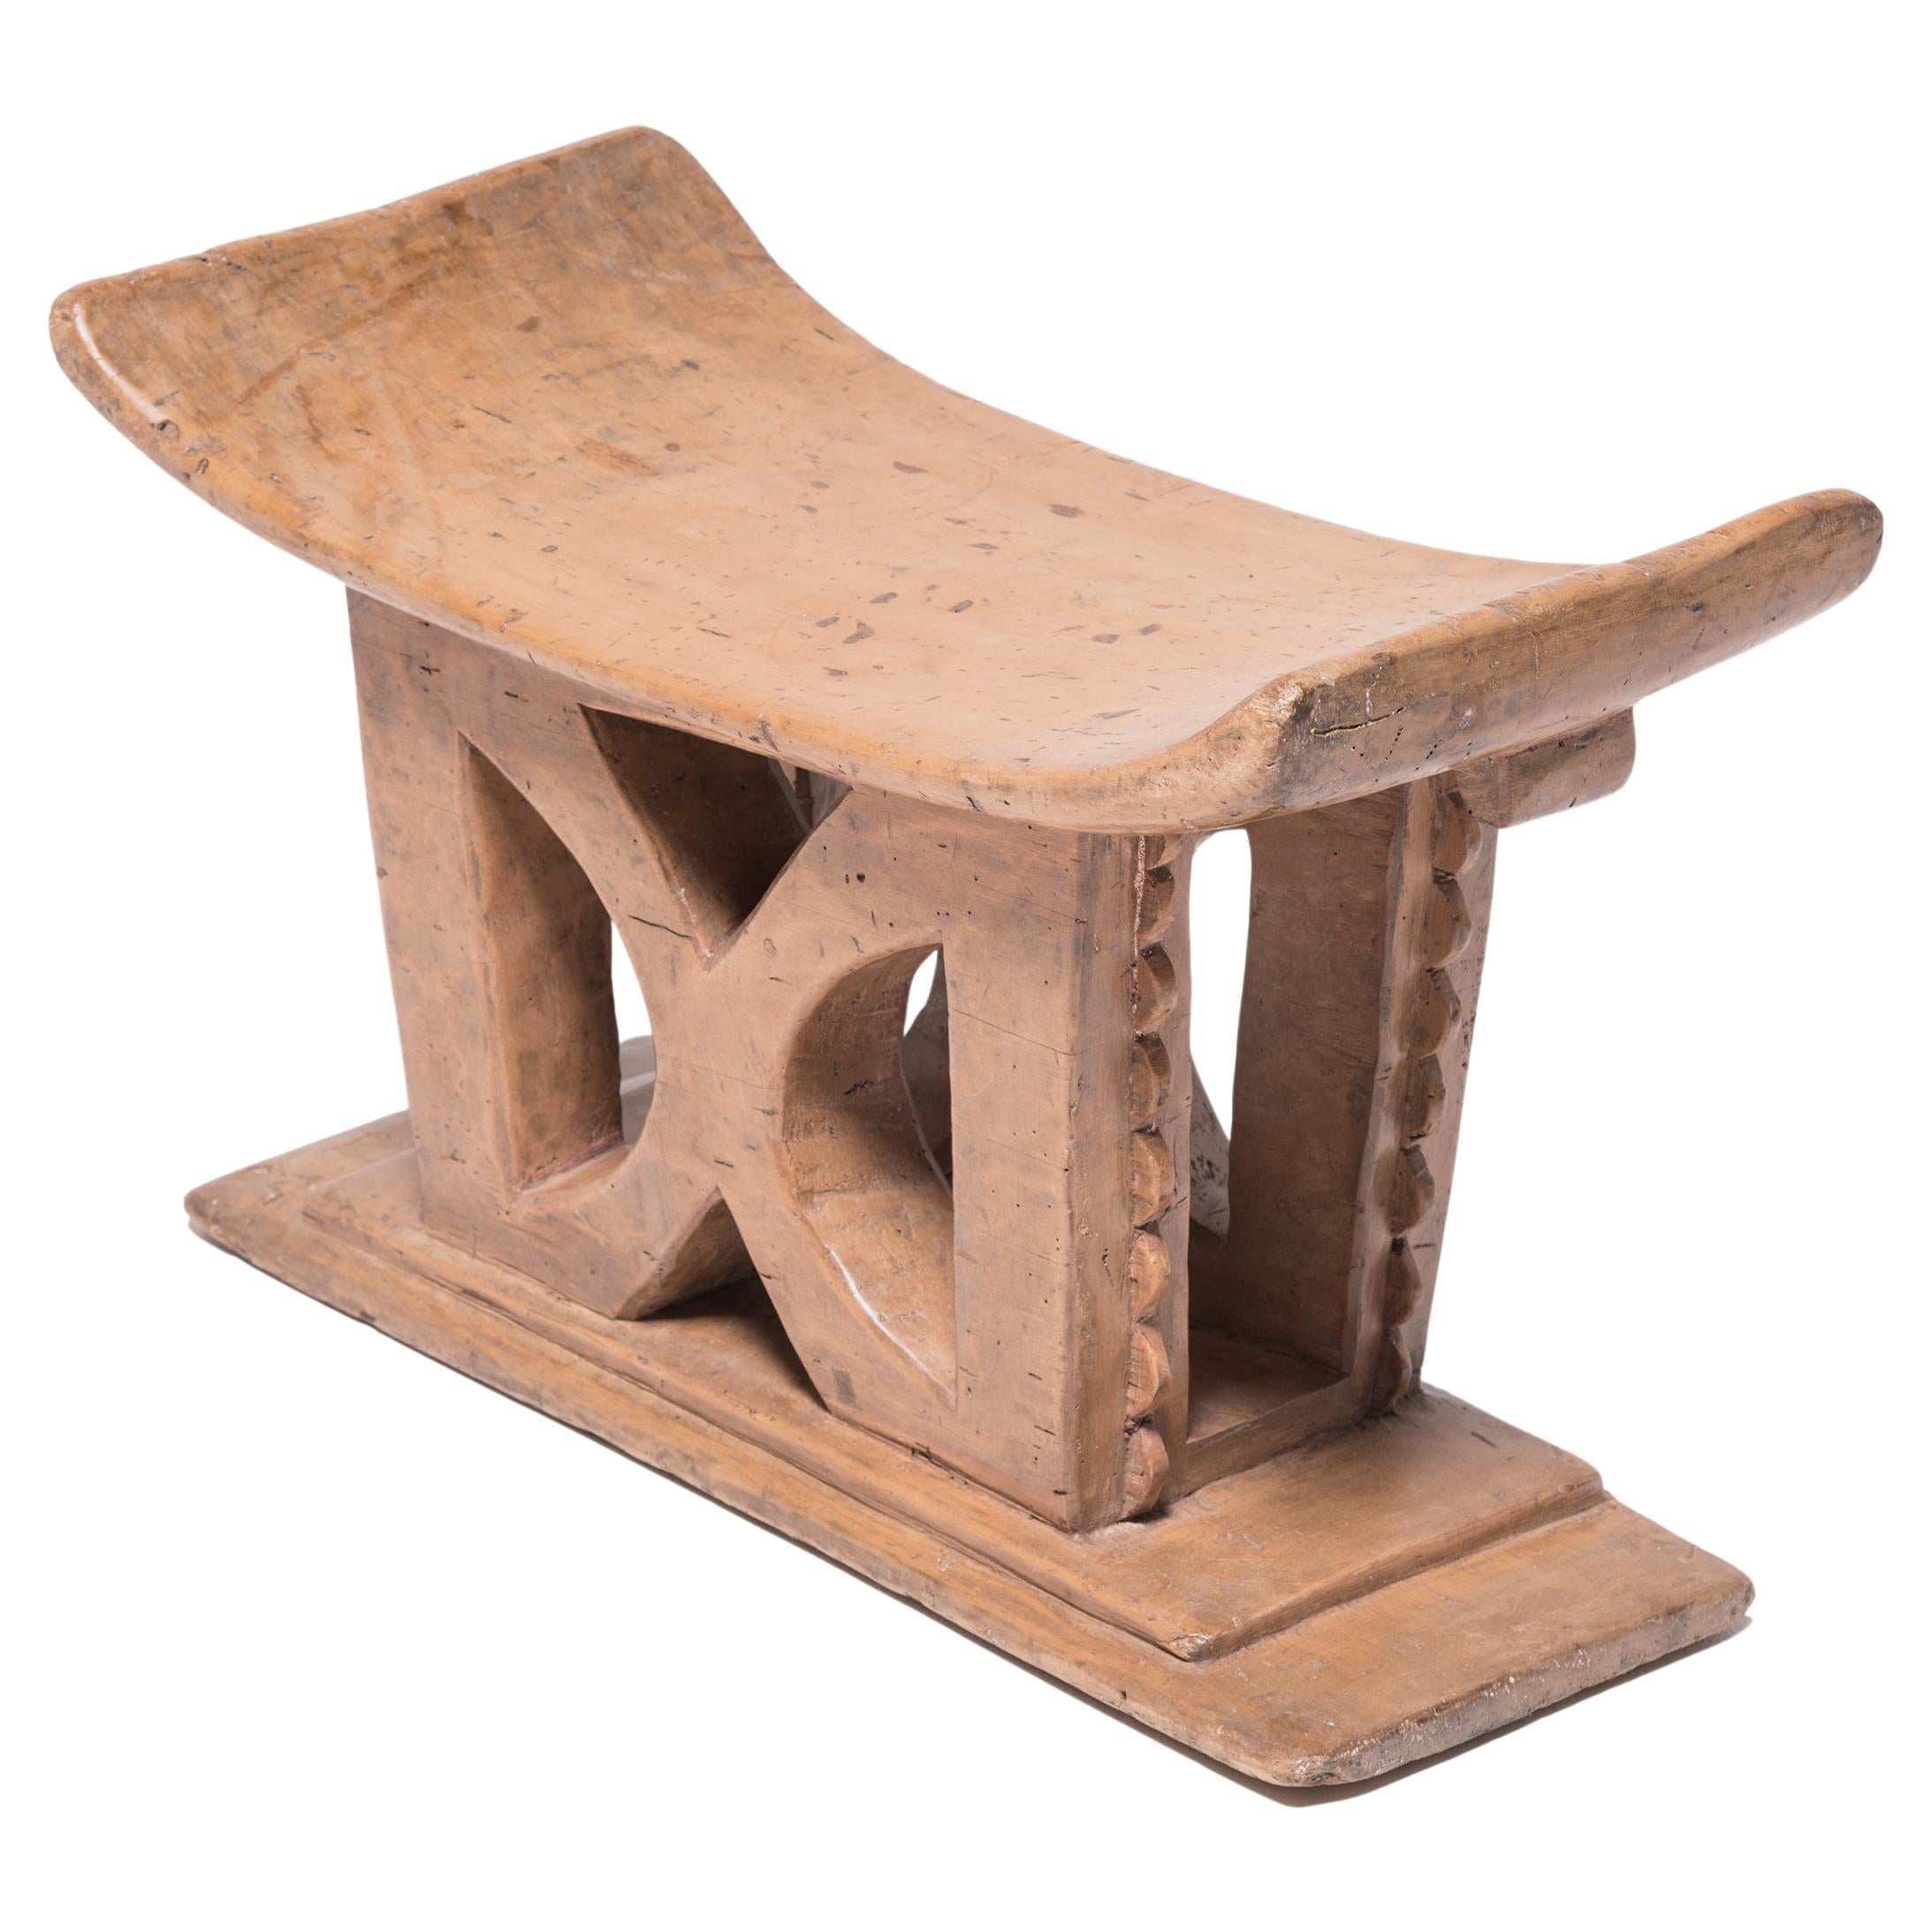 Stools indicated power, status, and lines of succession in traditional Ashanti culture. The tiered platform, curved seat, and ridged supports on this object reference the Ashanti King Stool. The gestural central symbol is a simplified and turned